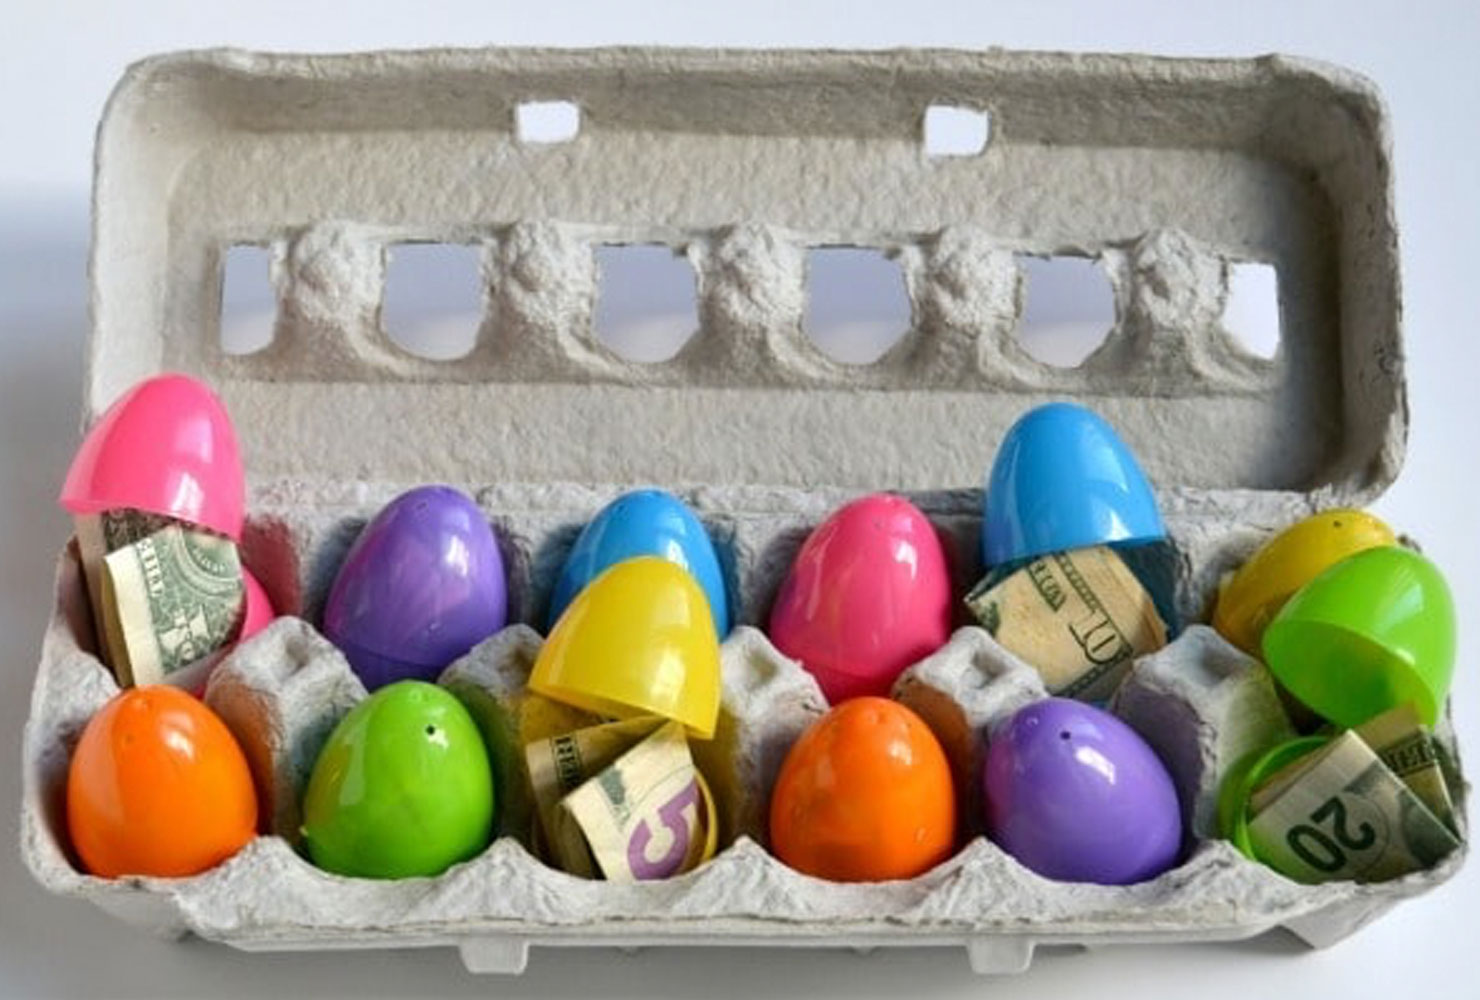 Colorful plastic eggs with money in an egg carton